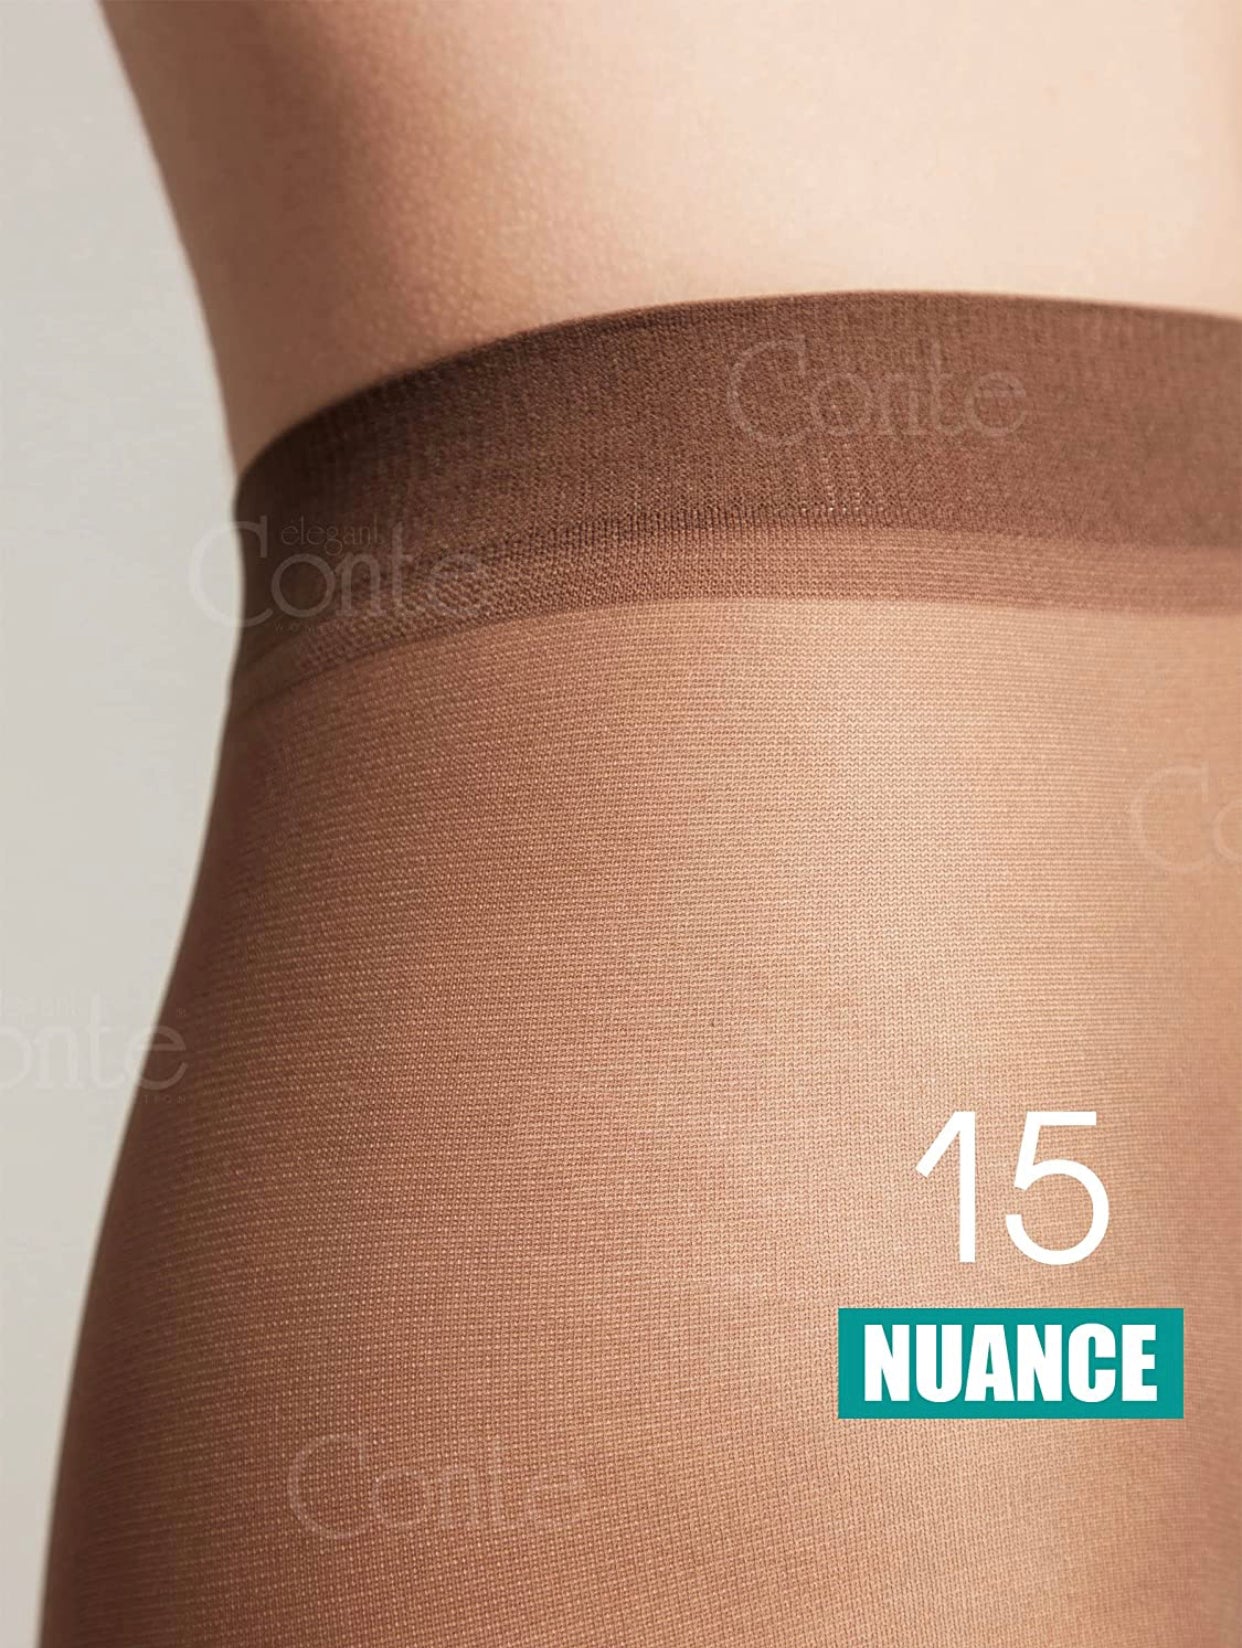 Conte Nuance 15 Den - Classic Women's Tights With a Reinforced Shorts (8С-35СП)